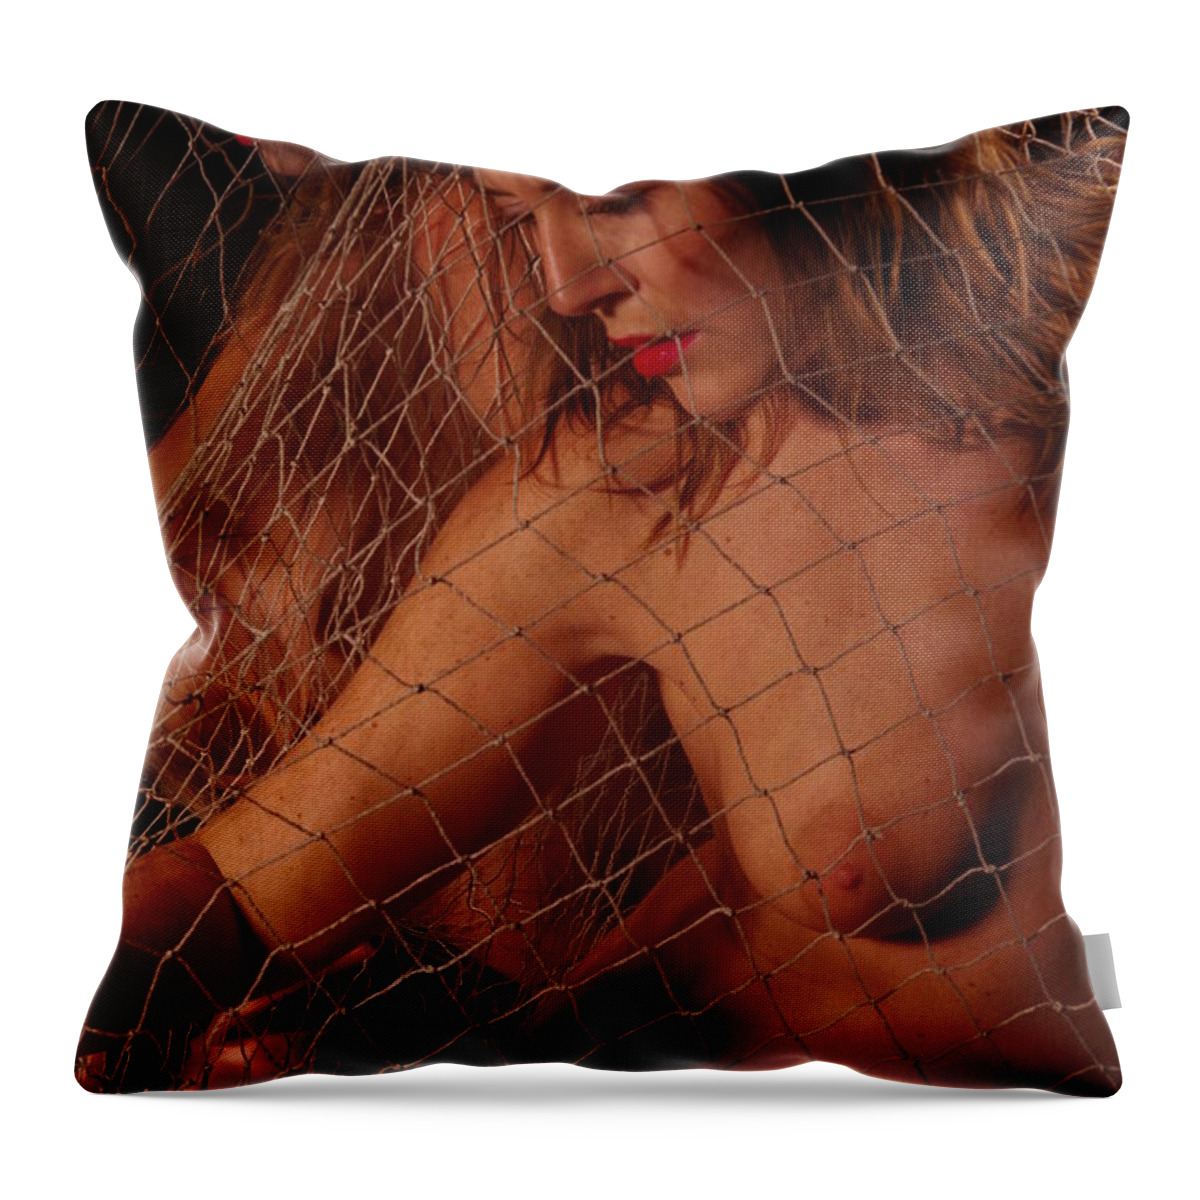 Nude Female Net Throw Pillow featuring the photograph Kebu0207 by Henry Butz